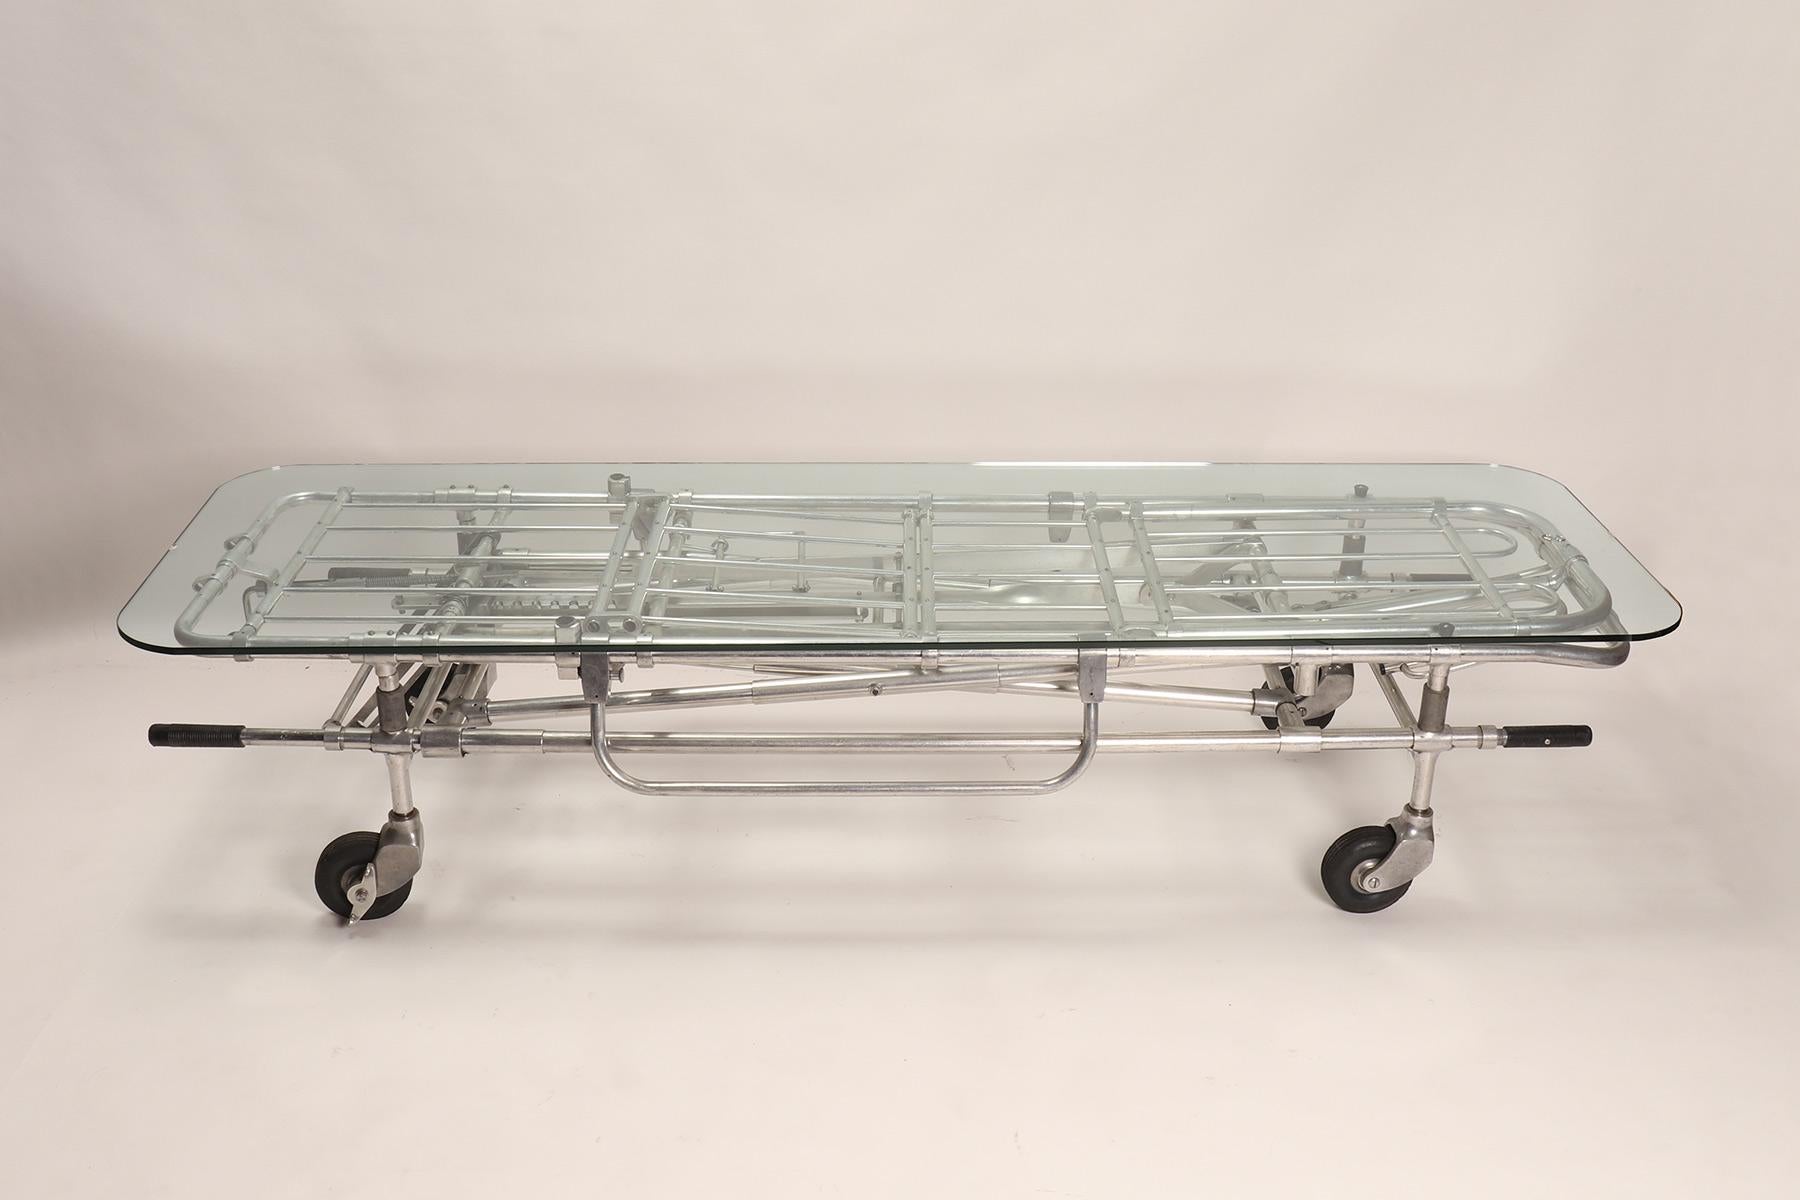 A fine example of reinterpretation and realization of an old element. A chrome metal gurney from an ambulance with wheels has been reused as a basis of an adjustable dining or coffee table, from 16 inches to 40 inches. The tabletop is made out of